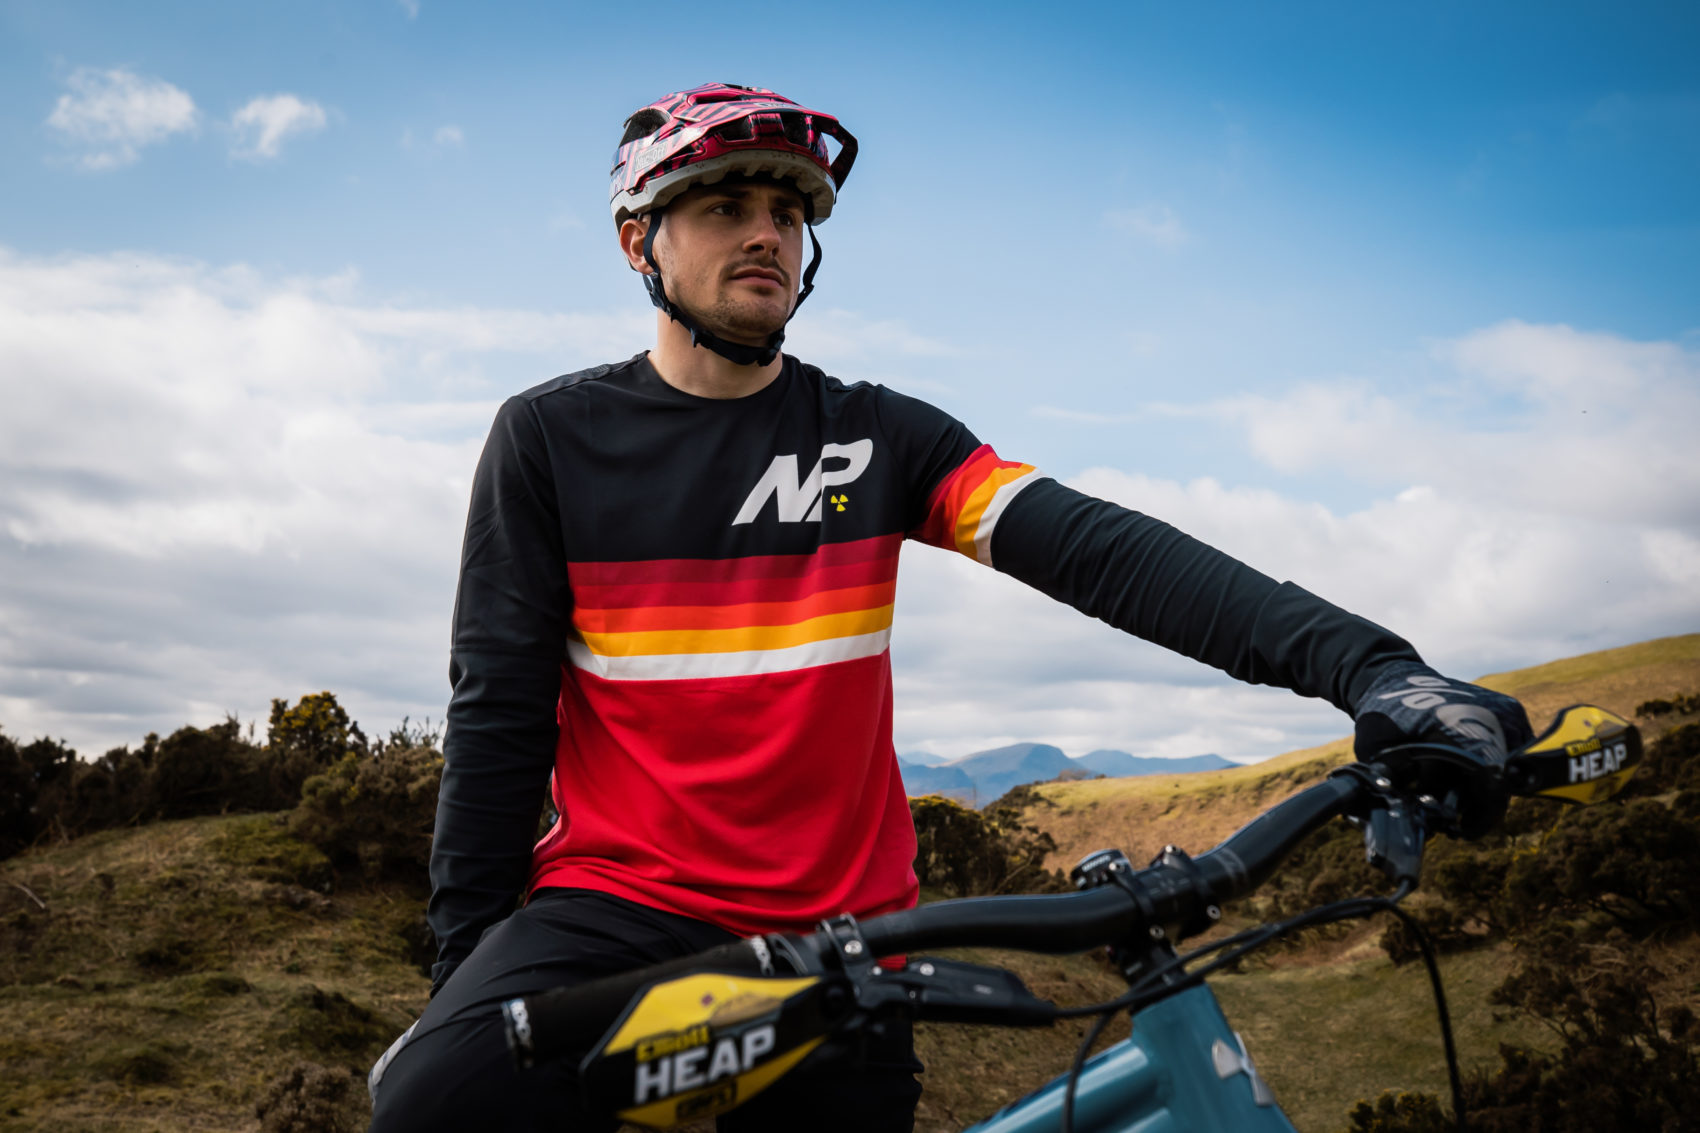 Nukeproof Launch new Ridewear for 2021